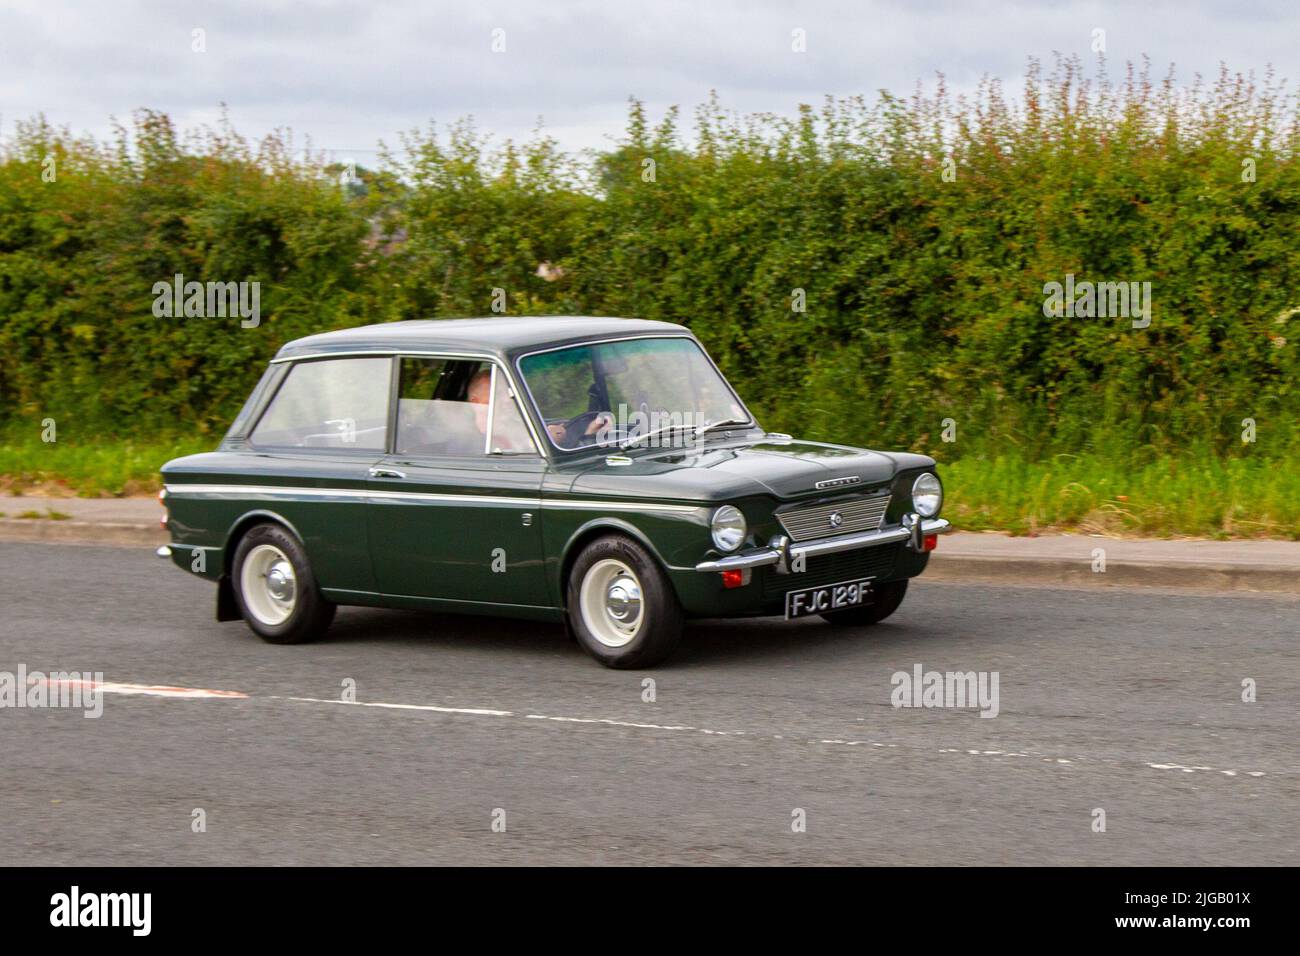 1968 60s green sixties Singer Chamois IMP Sport 875cc petrol; en-route to Hoghton Tower for the Supercar Summer Showtime car meet which is organised by Great British Motor Shows in Preston, UK Stock Photo